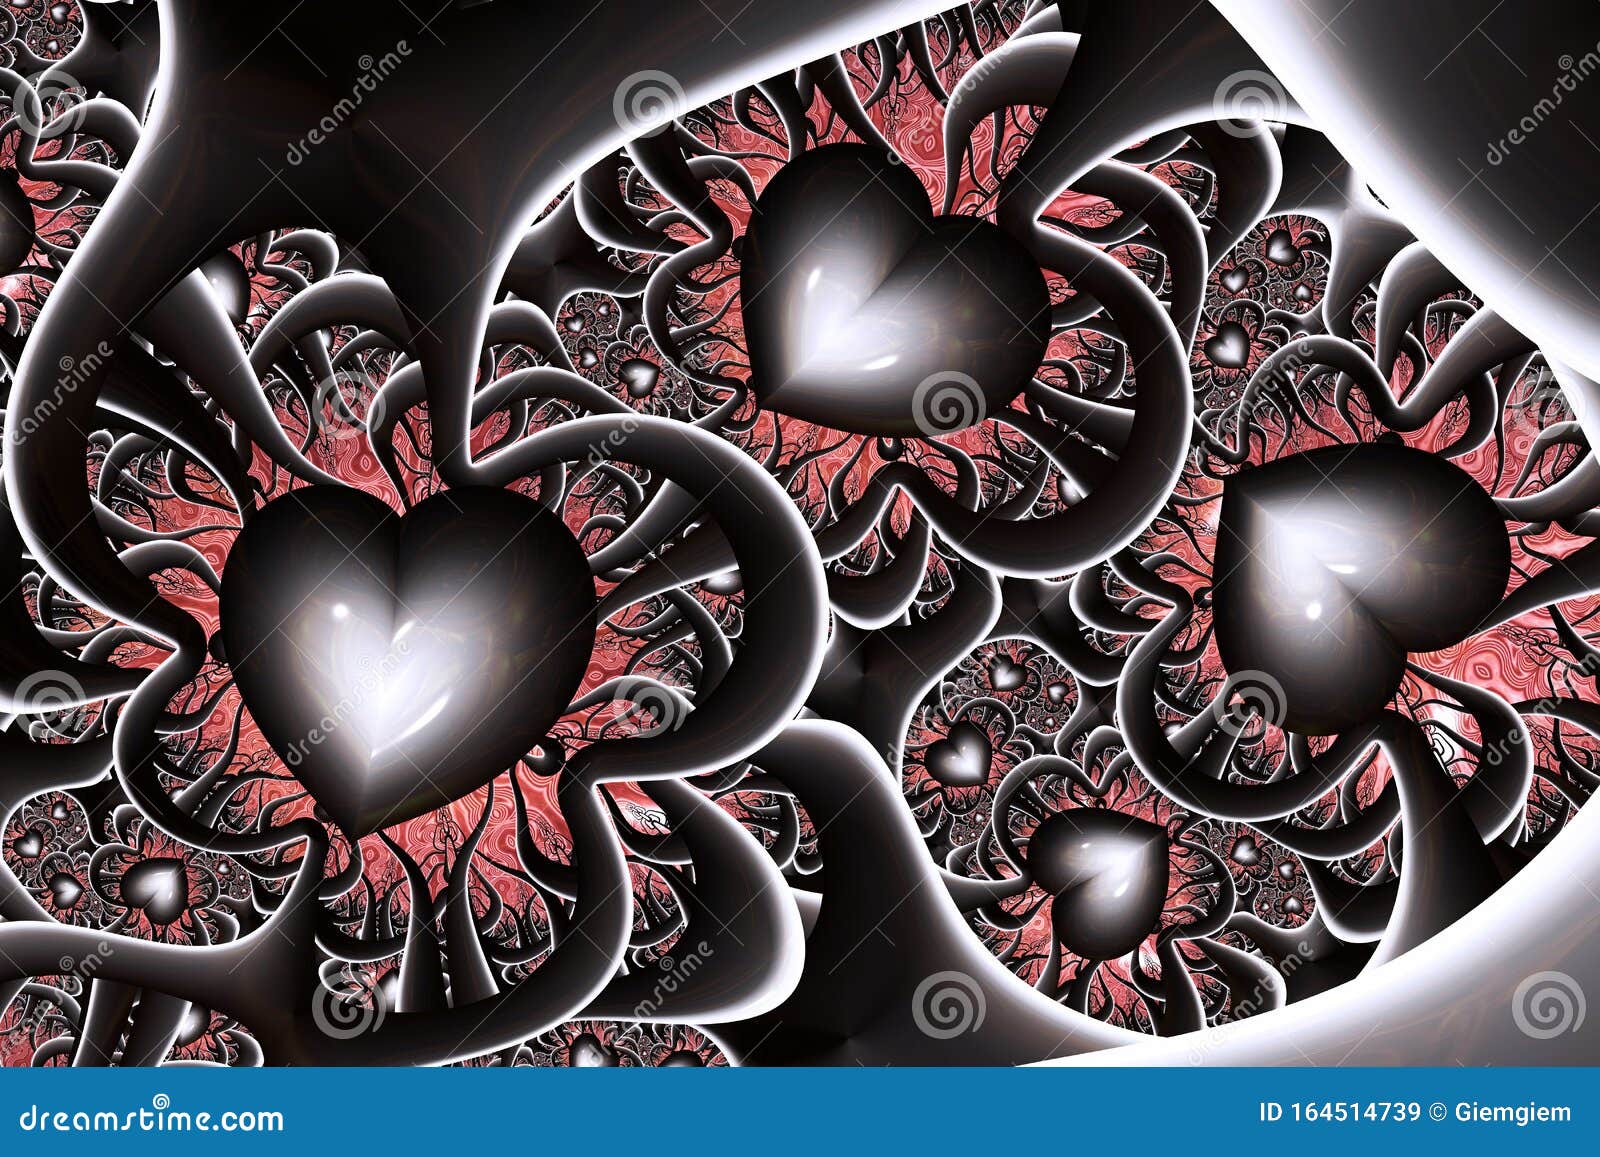 Background Abstract Illustration for Design, the Black Heart Was Imprisoned  by Chains and Vines, Broken Heart Concept Stock Illustration - Illustration  of decorative, geometric: 164514739